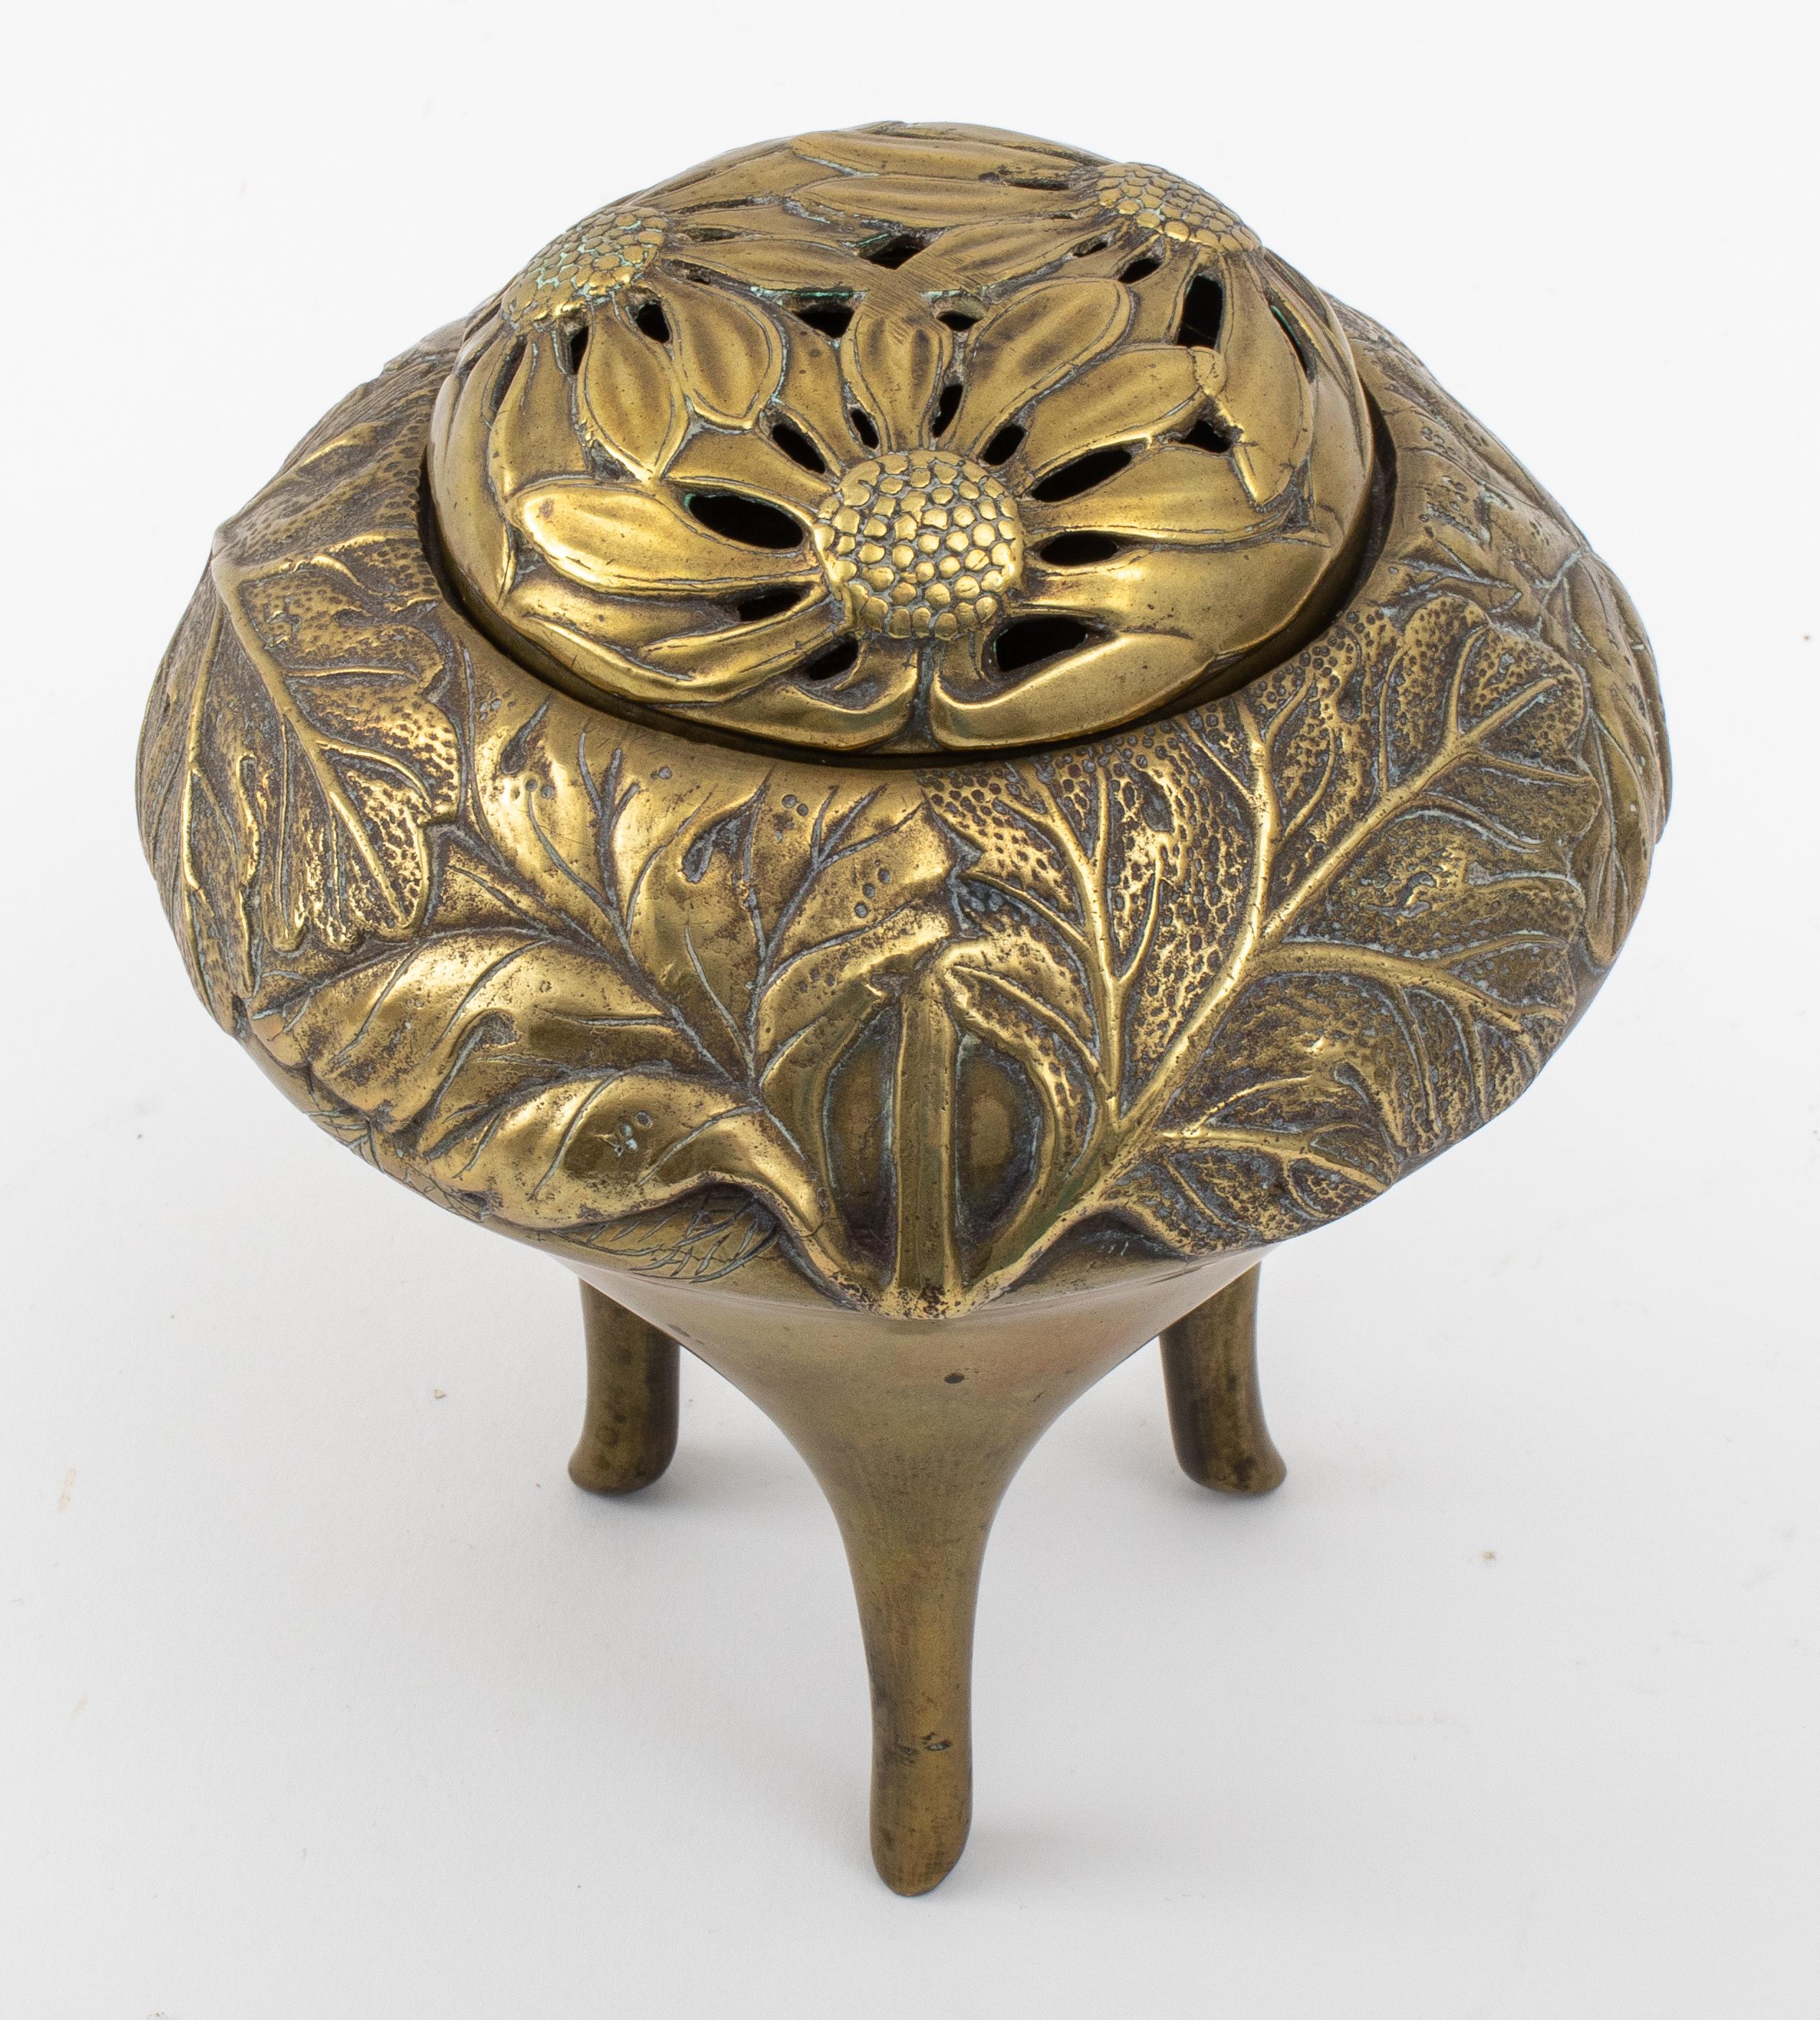 Continental Brass Art Nouveau incense burner in the Japonesque taste, the rounded chamber with pierced cover, the whole decorated with stylized floral motifs above a tripod base.

Measures: 6